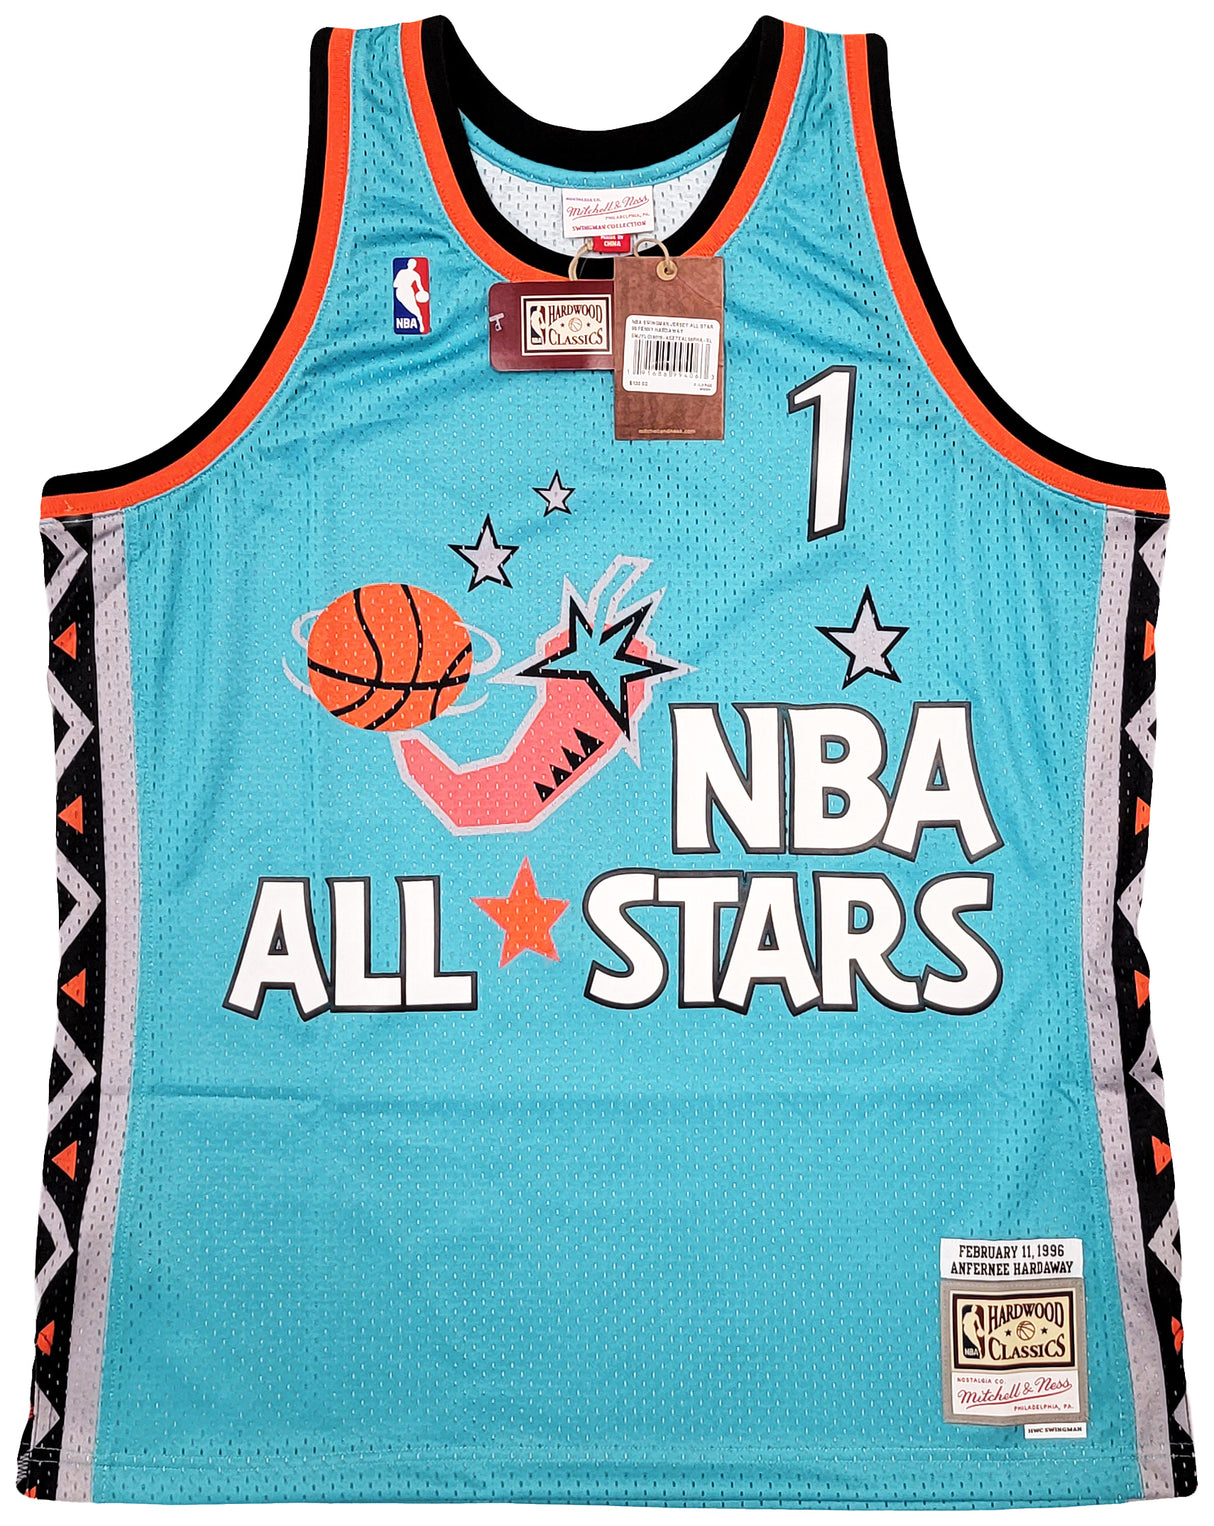 Orlando Magic Anfernee Penny Hardaway Autographed Teal Authentic Mitchell & Ness All Star Game Feb 11,1996 Hardwood Classic Swingman Jersey Size XL PSA/DNA Stock #208256